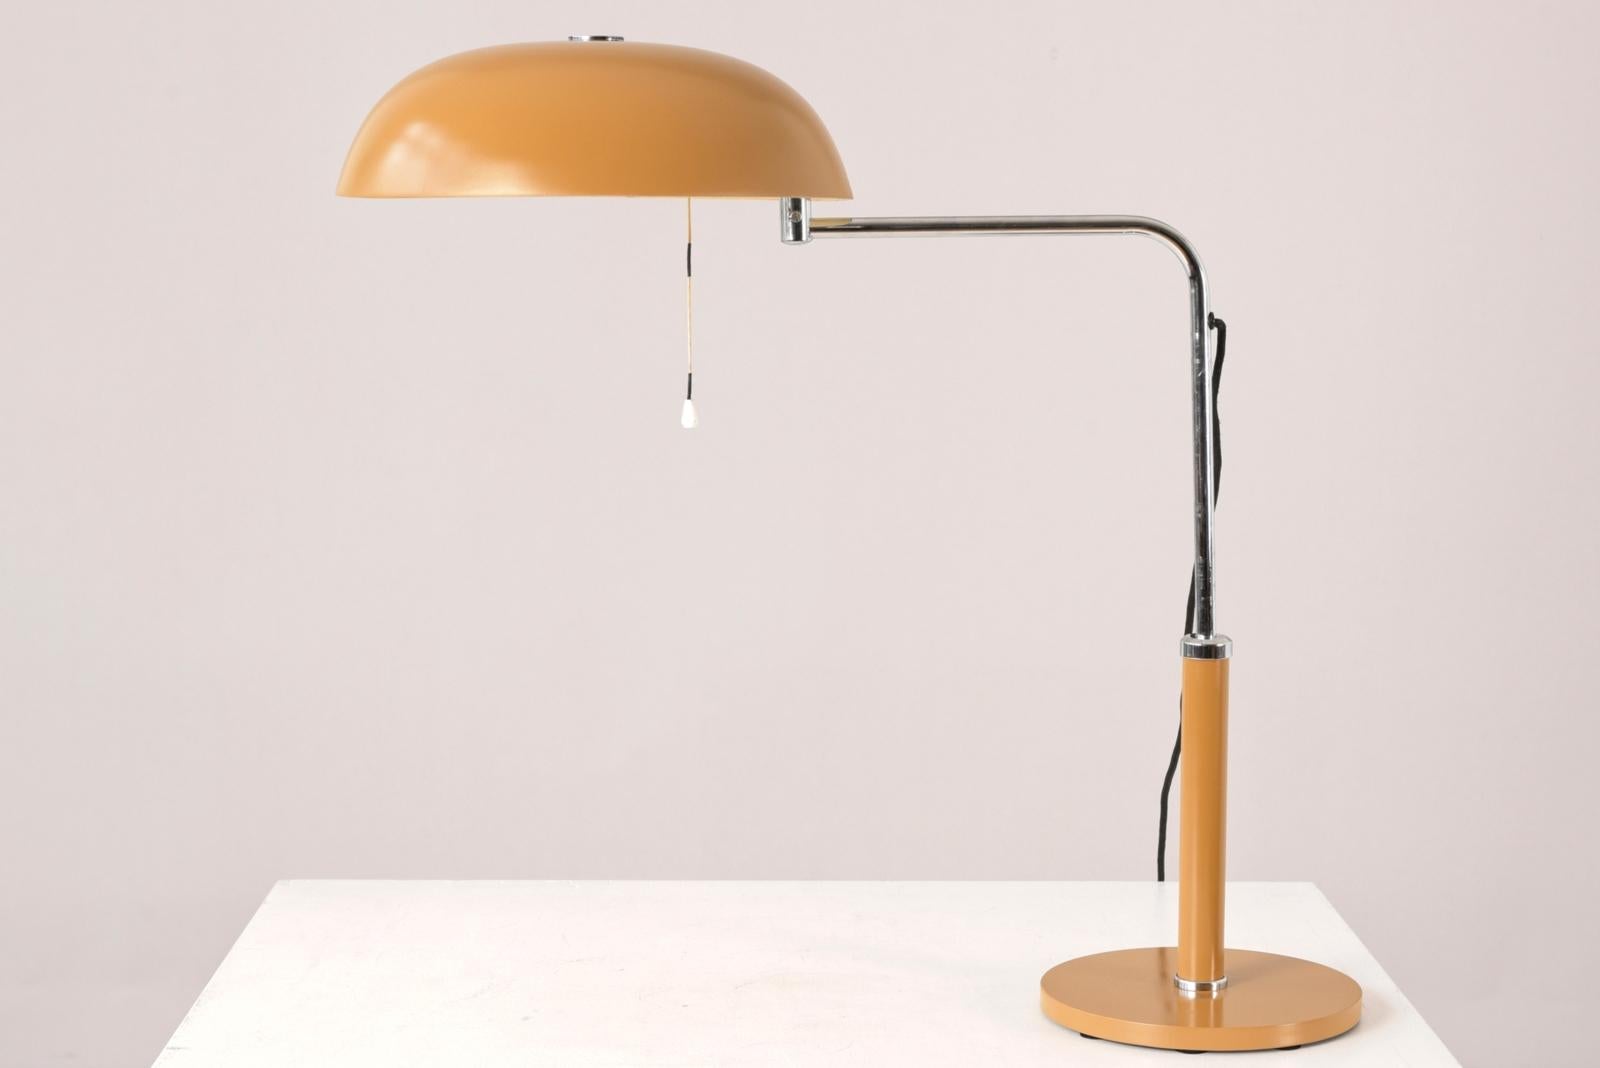 Mid-20th Century Table Lamp Quick 1500 by Alfred Müller for Amba, Switzerland - 1959 For Sale